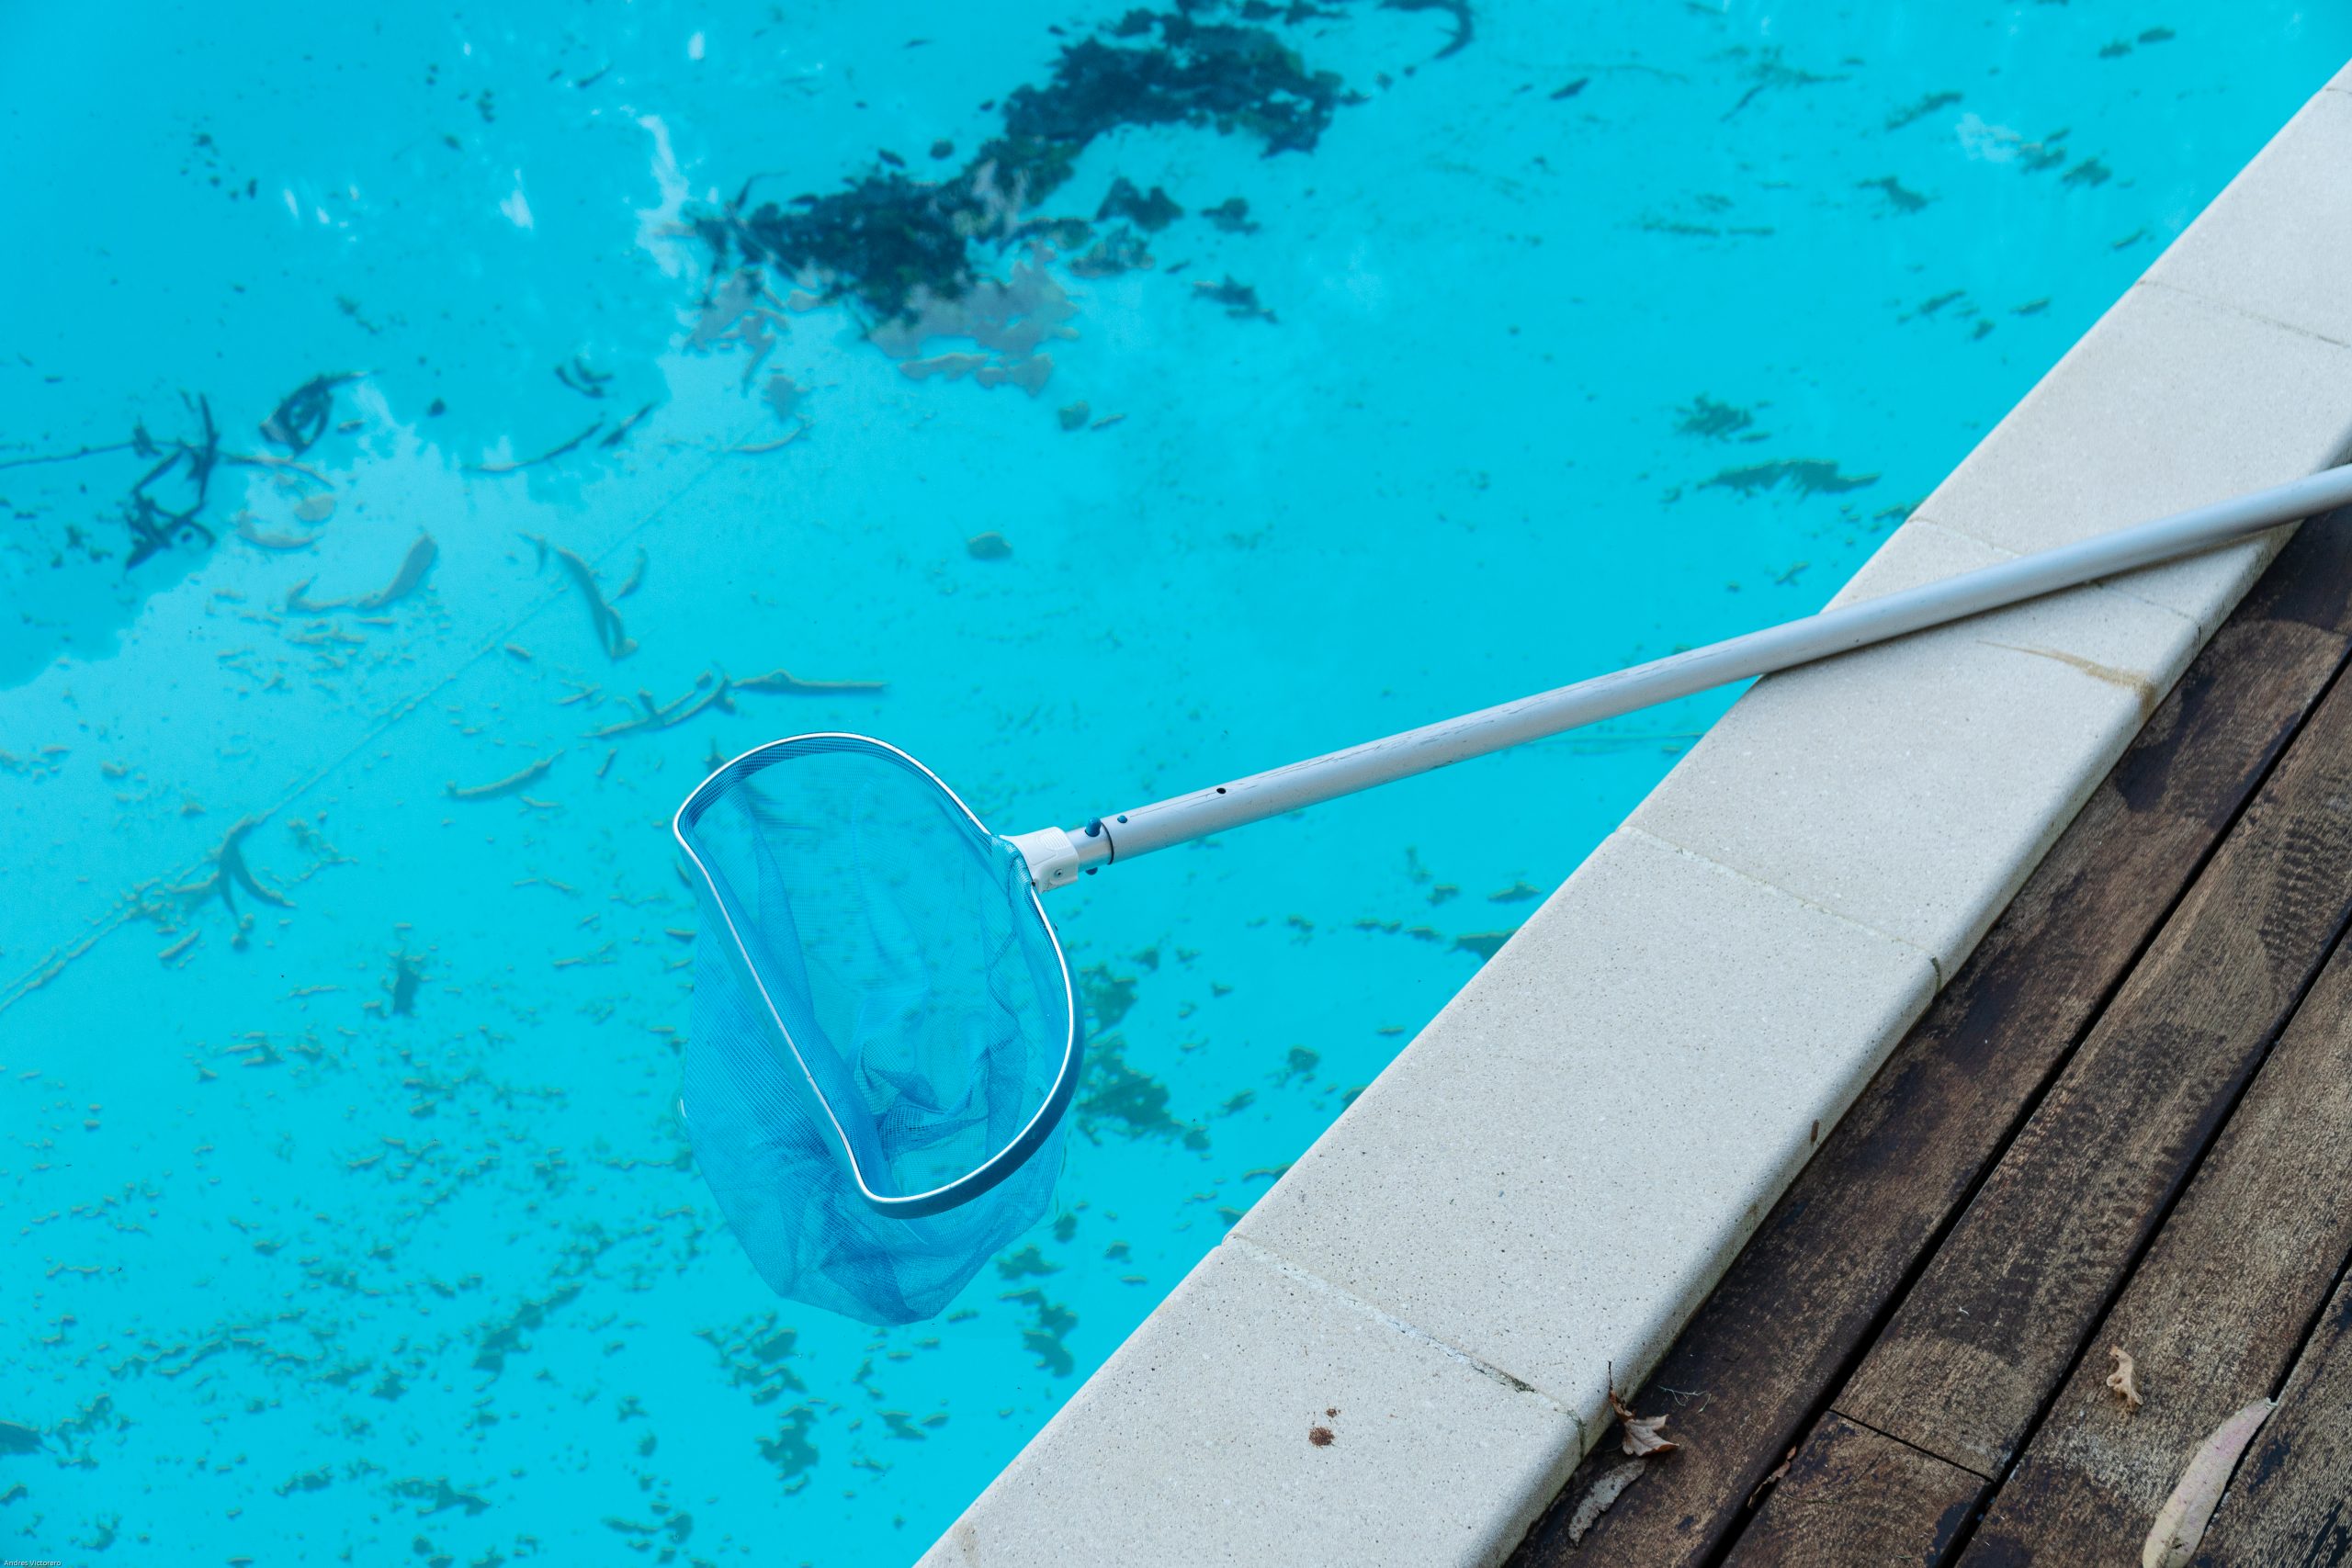 Keeping pool maintained during the winter by cleaning debris out with a net.